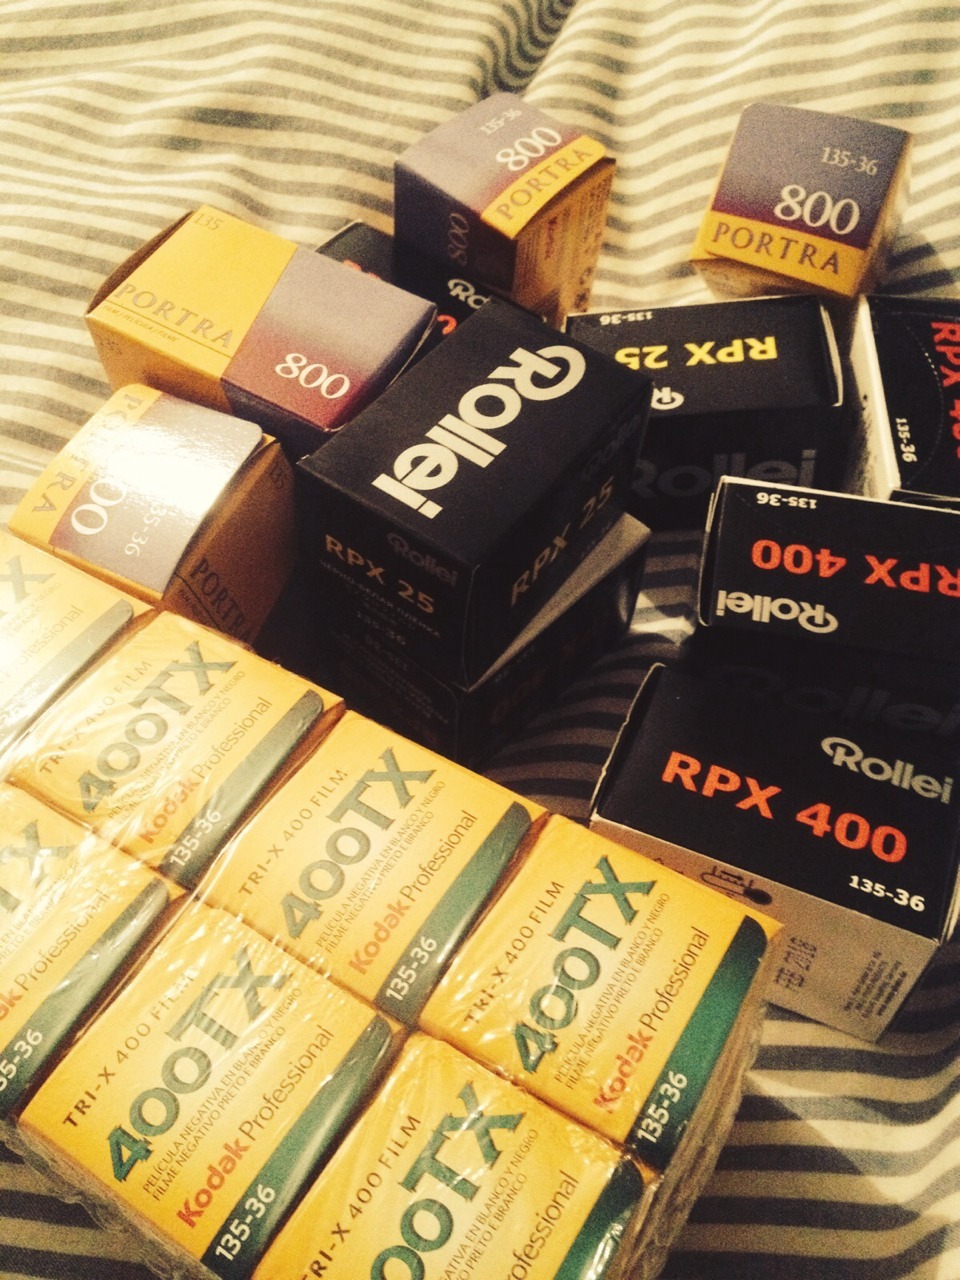 Hunting for a new film.
This much film sure didn’t used to cost 150 bucks.